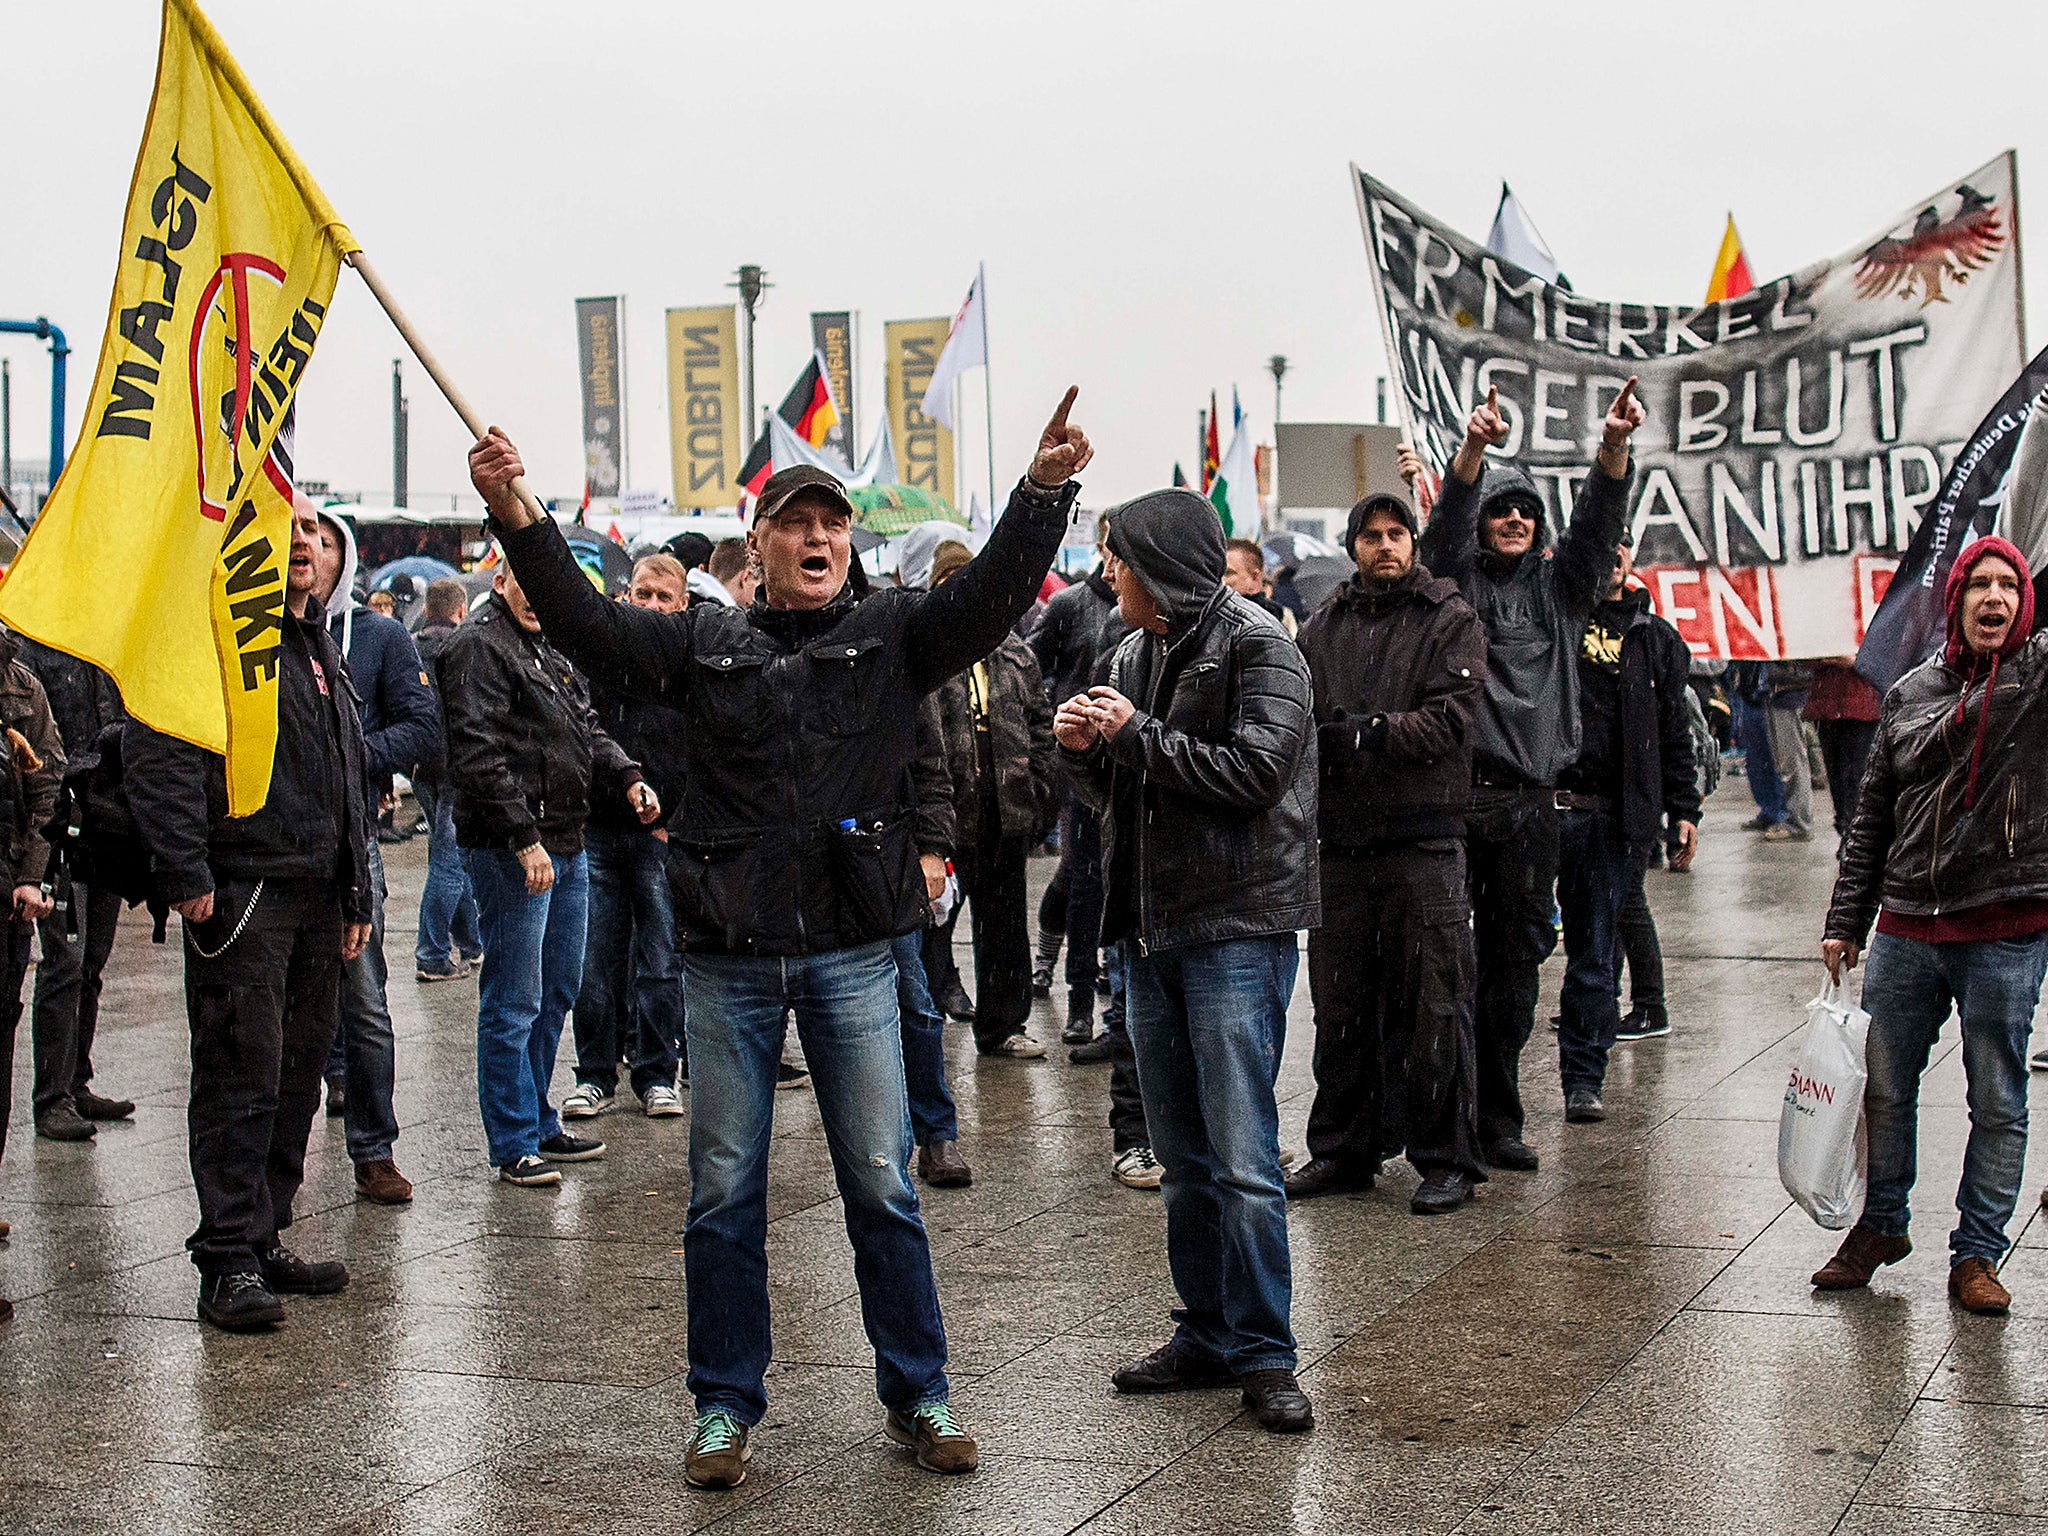 Right-wing, anti-migrant protests have become more common in Germany, and AfD's popularity has grown with the rising discontent over the presence of refugees in the country